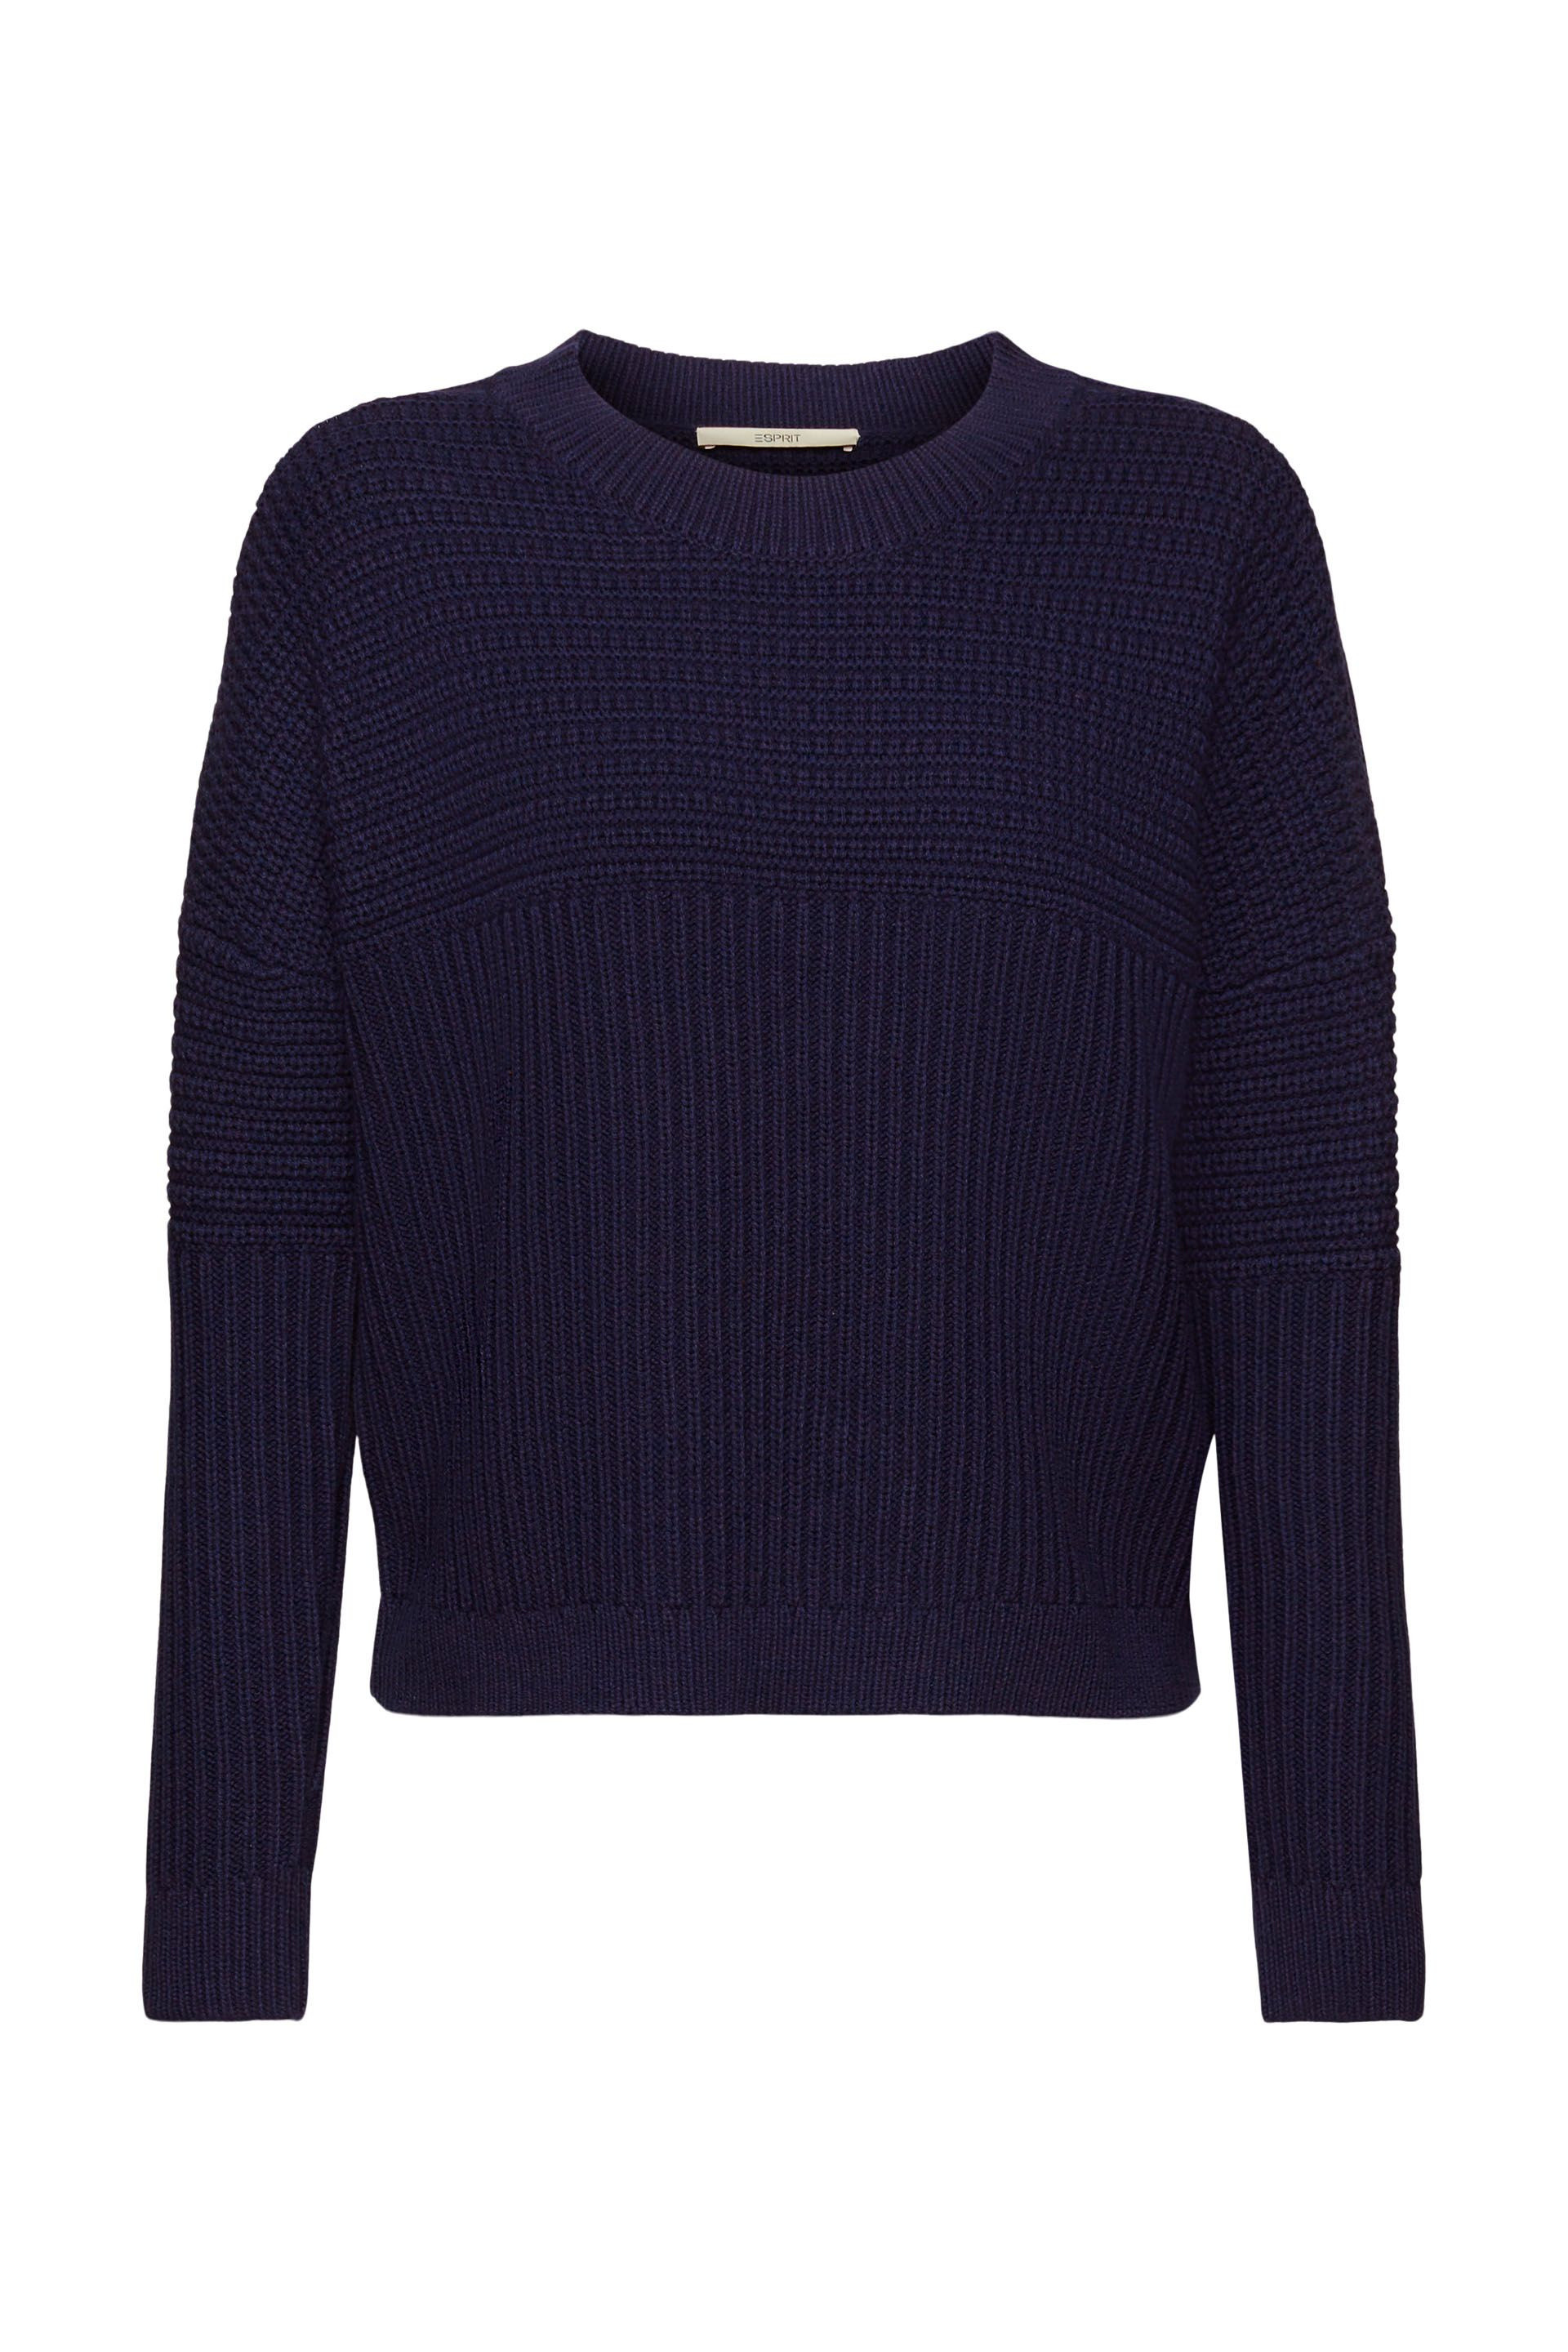 Esprit - Chunky knit pullover in cotton blend, Dark Blue, large image number 0